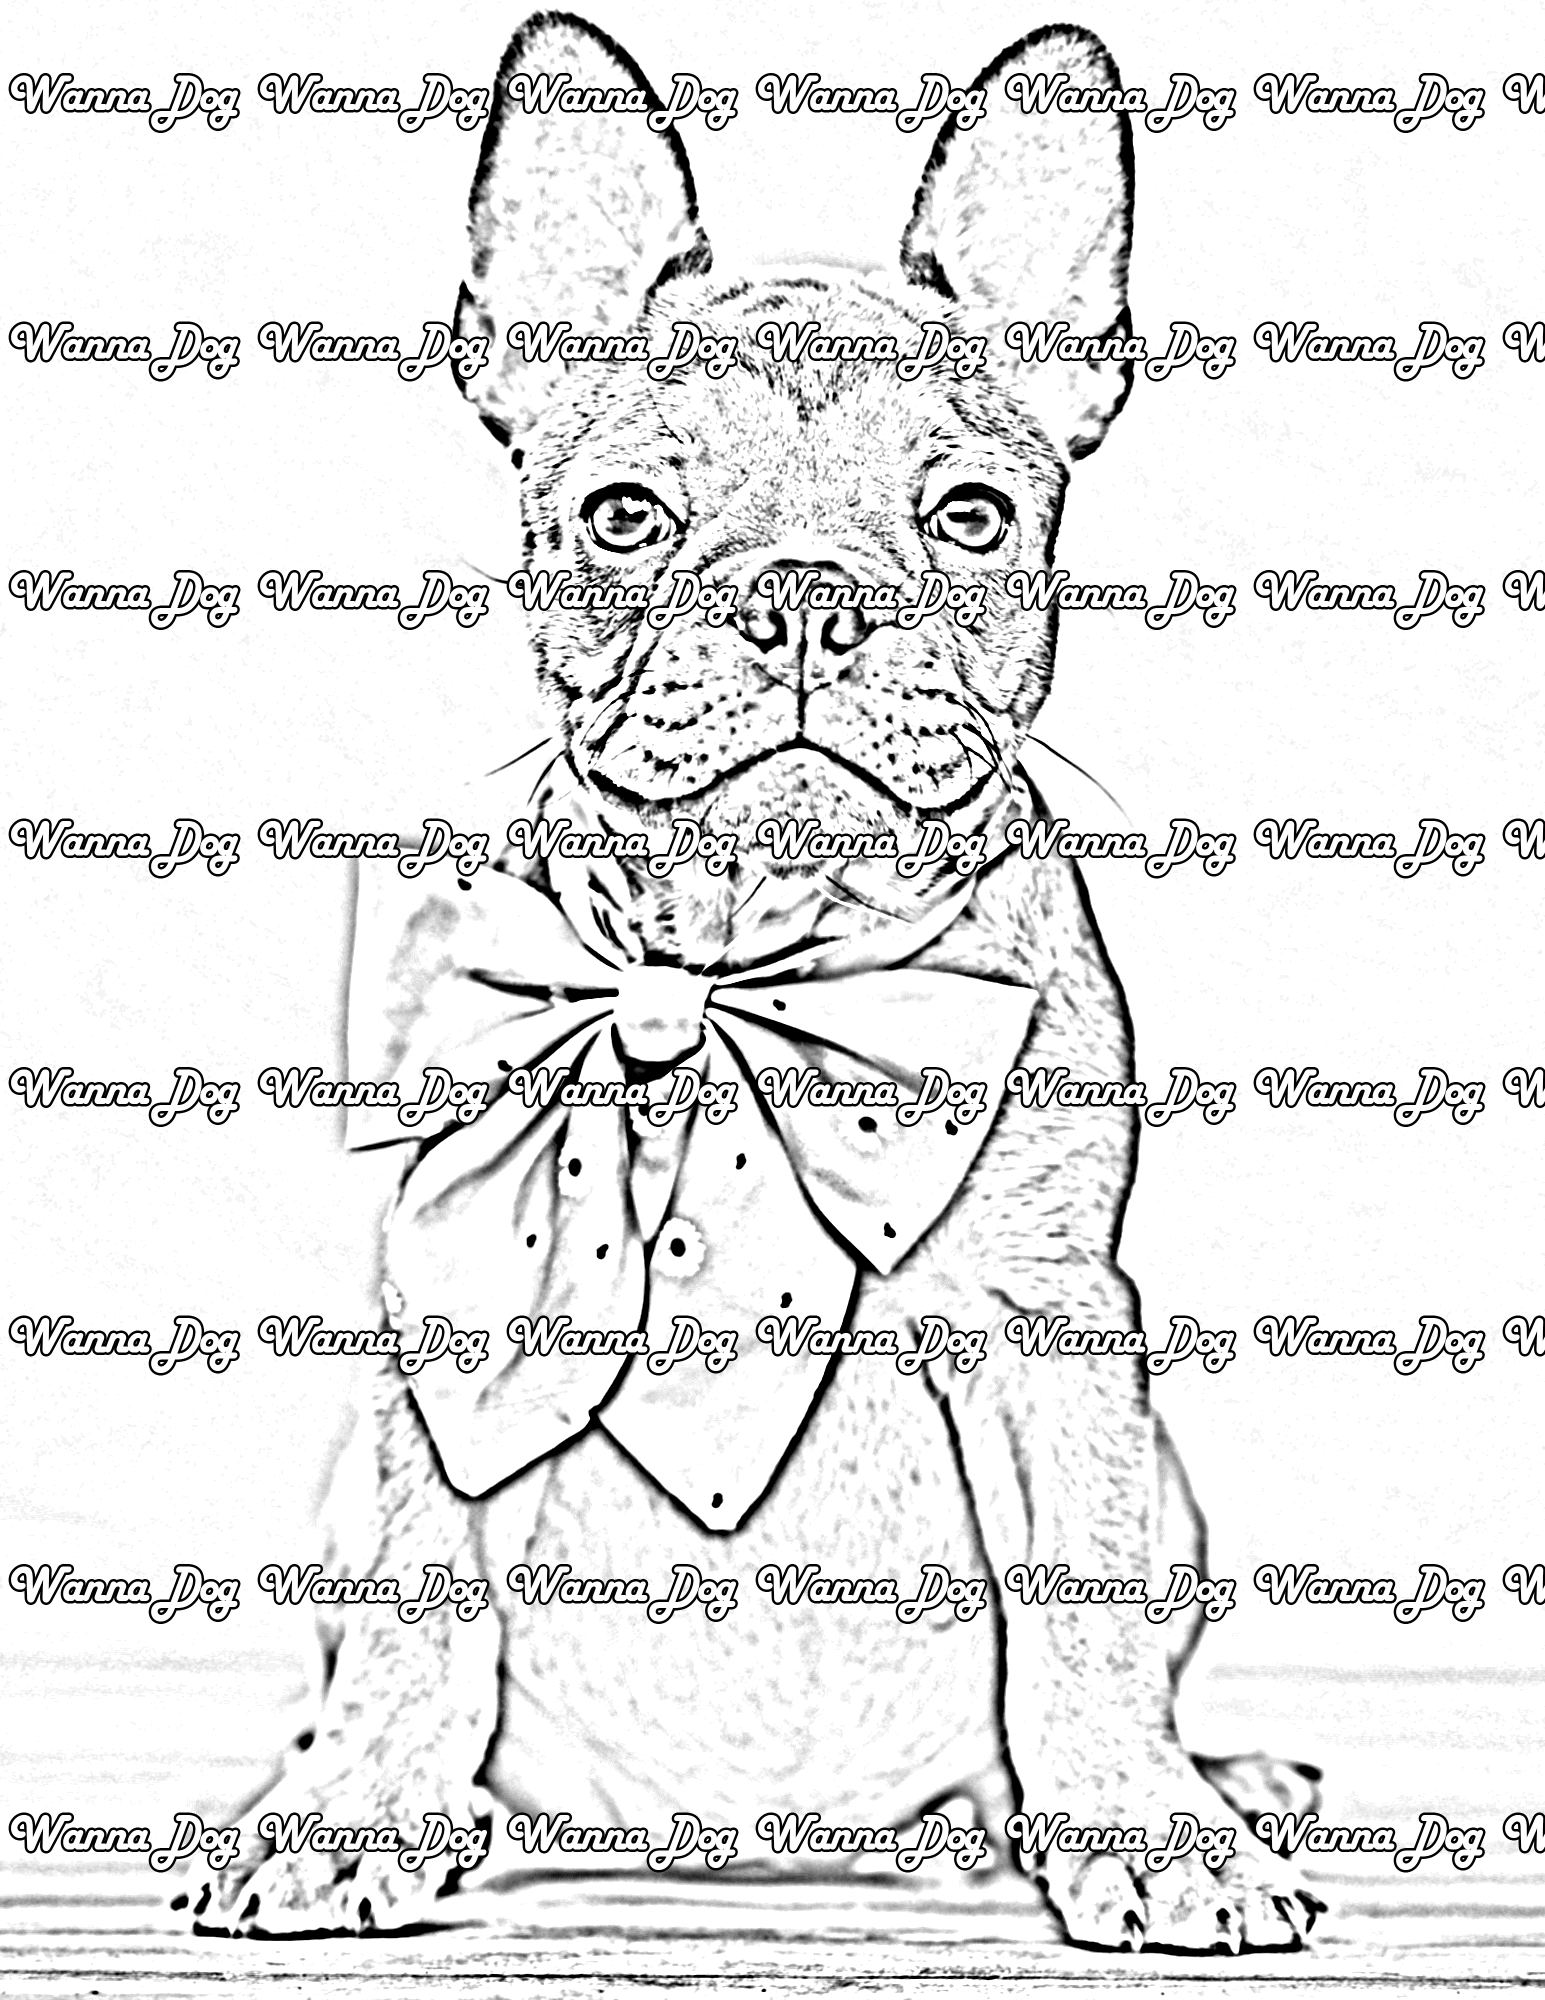 French Bulldog Puppy Coloring Page of a French Bulldog Puppy with a bowtie